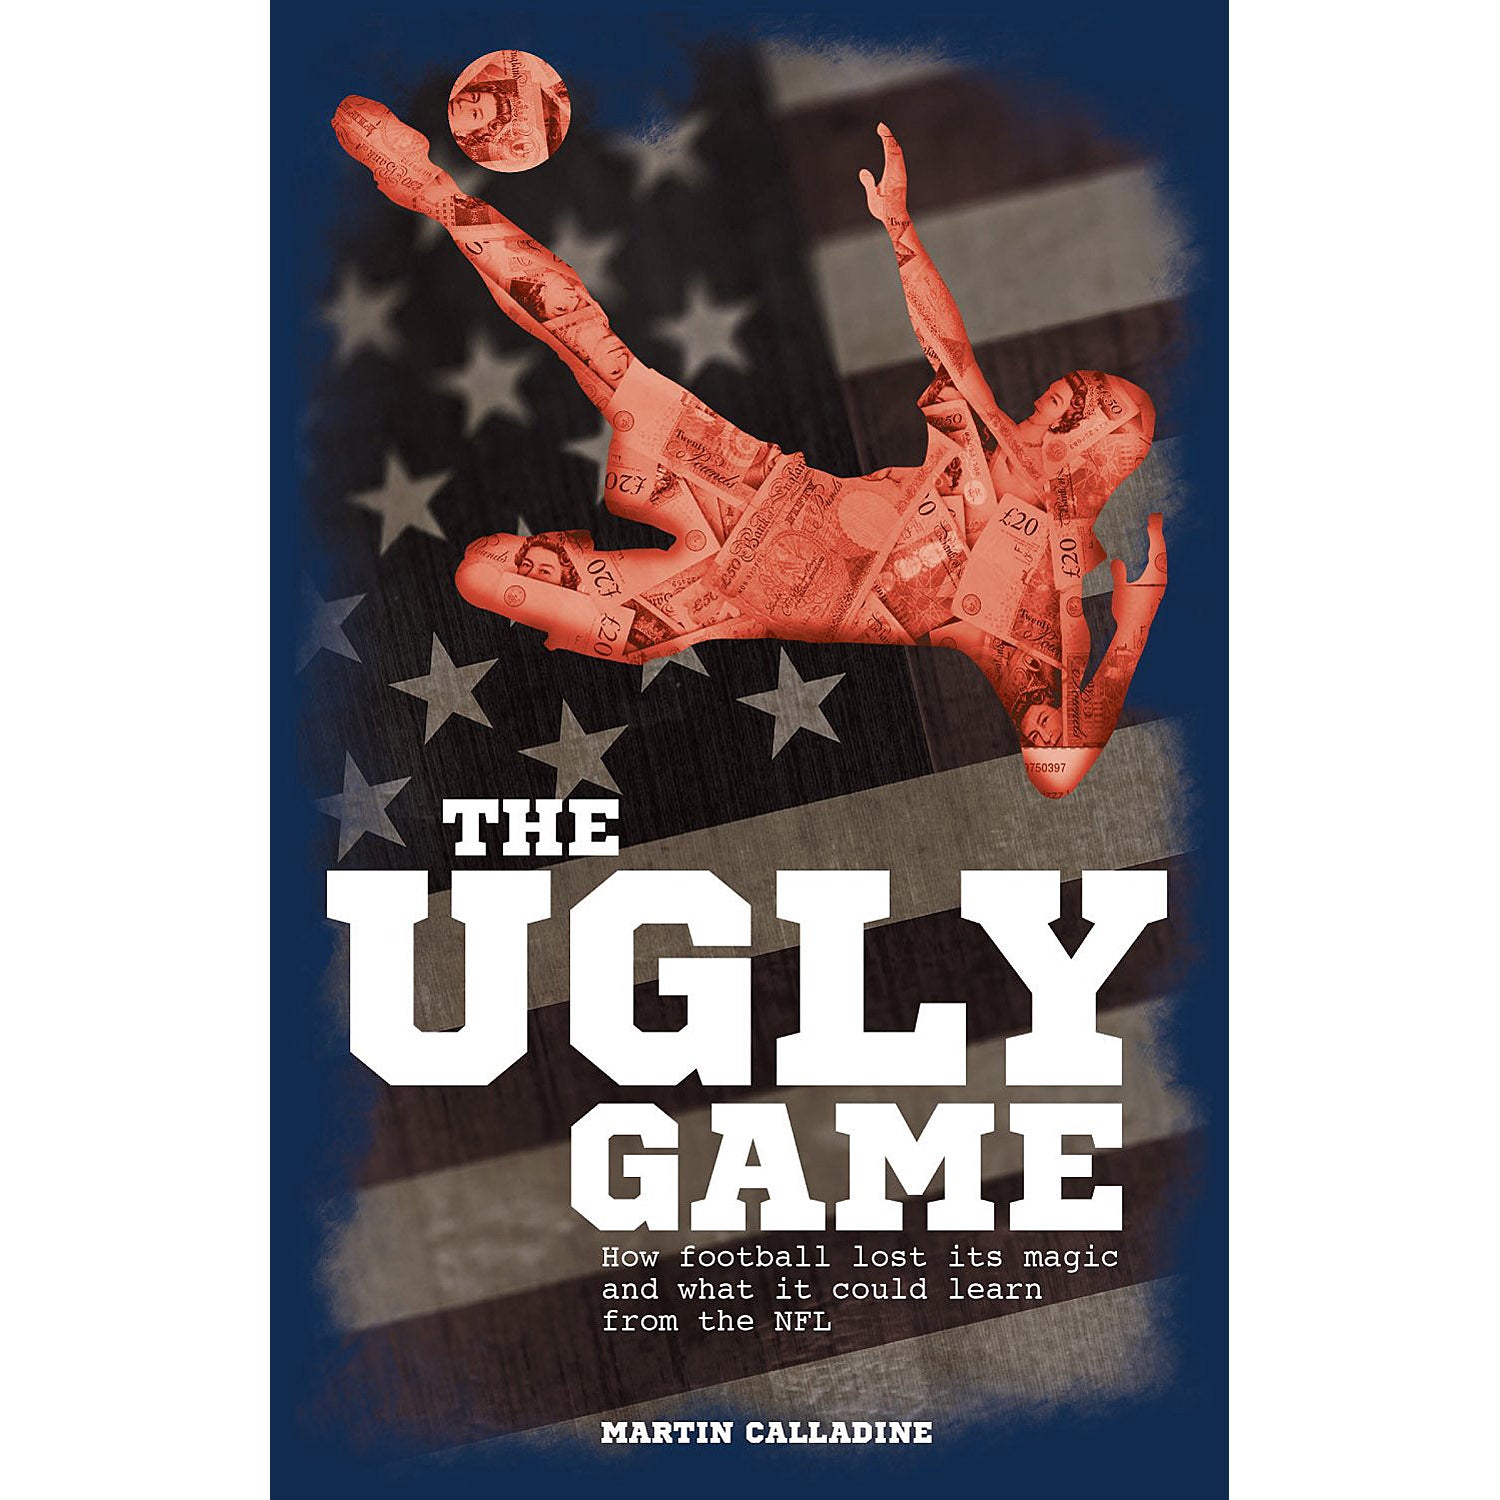 The Ugly Game – How football lost its magic and what it could learn from the NFL